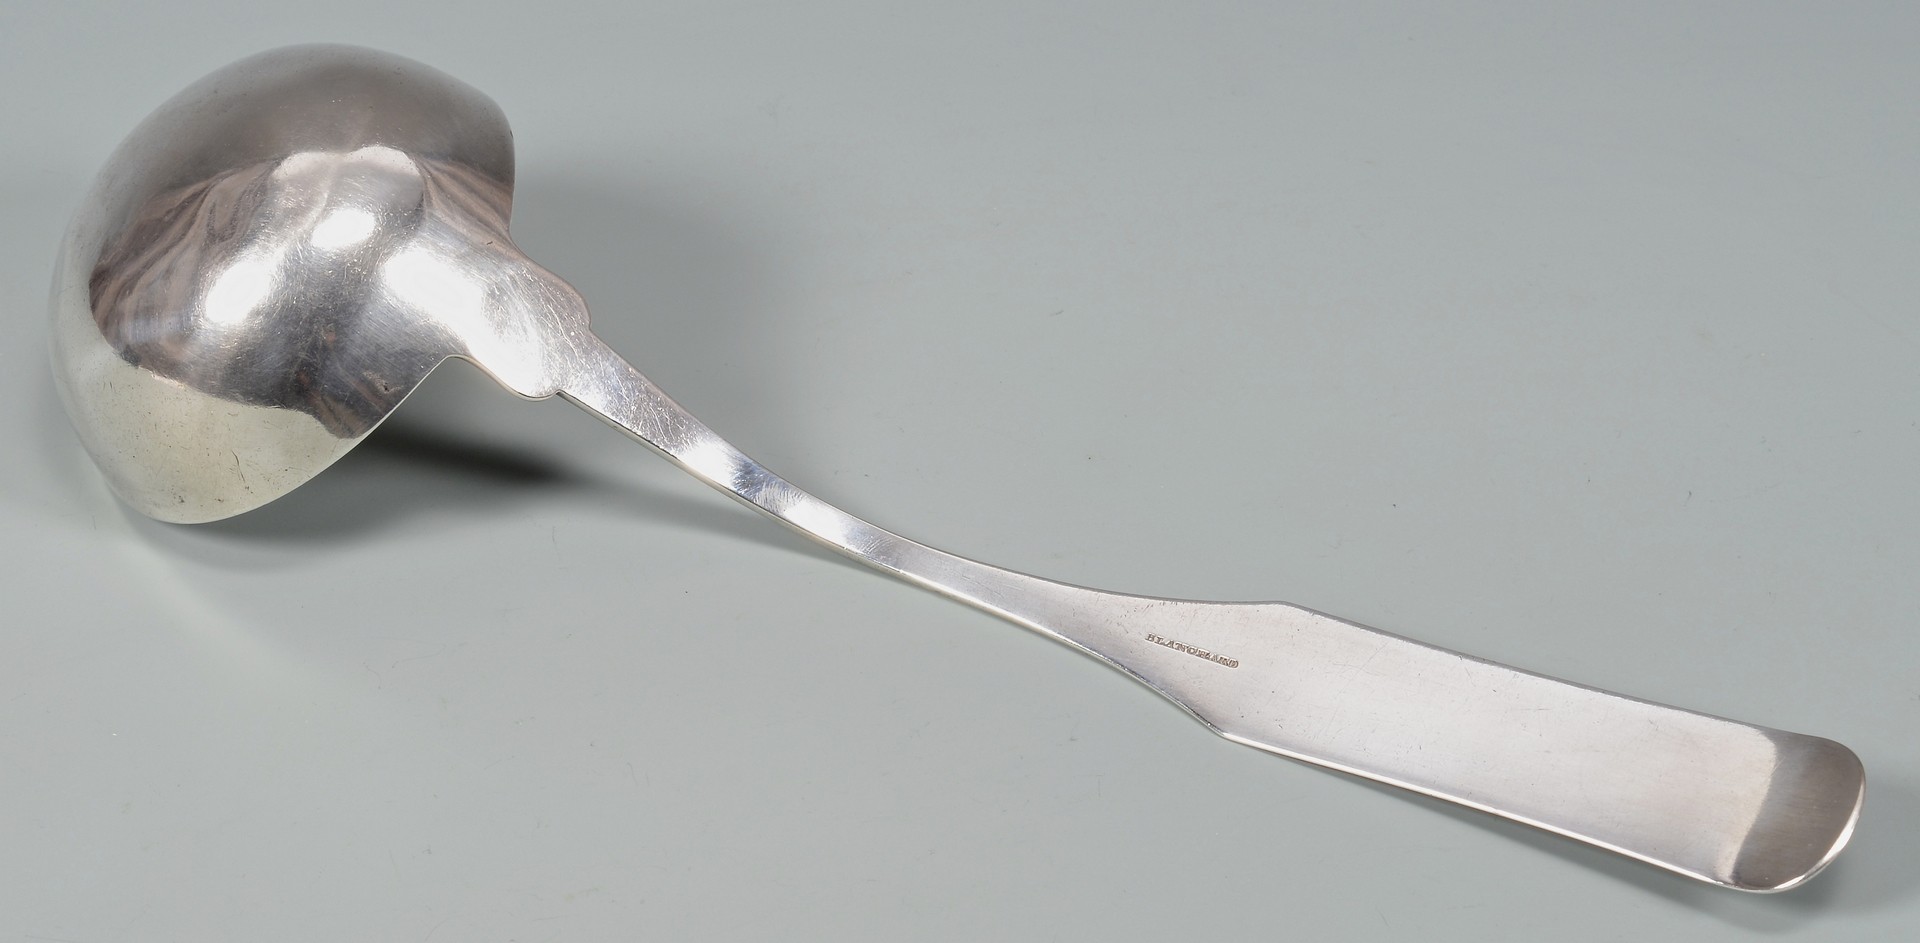 Lot 162: Coin Silver Punch Ladle, Blanchard incuse mark